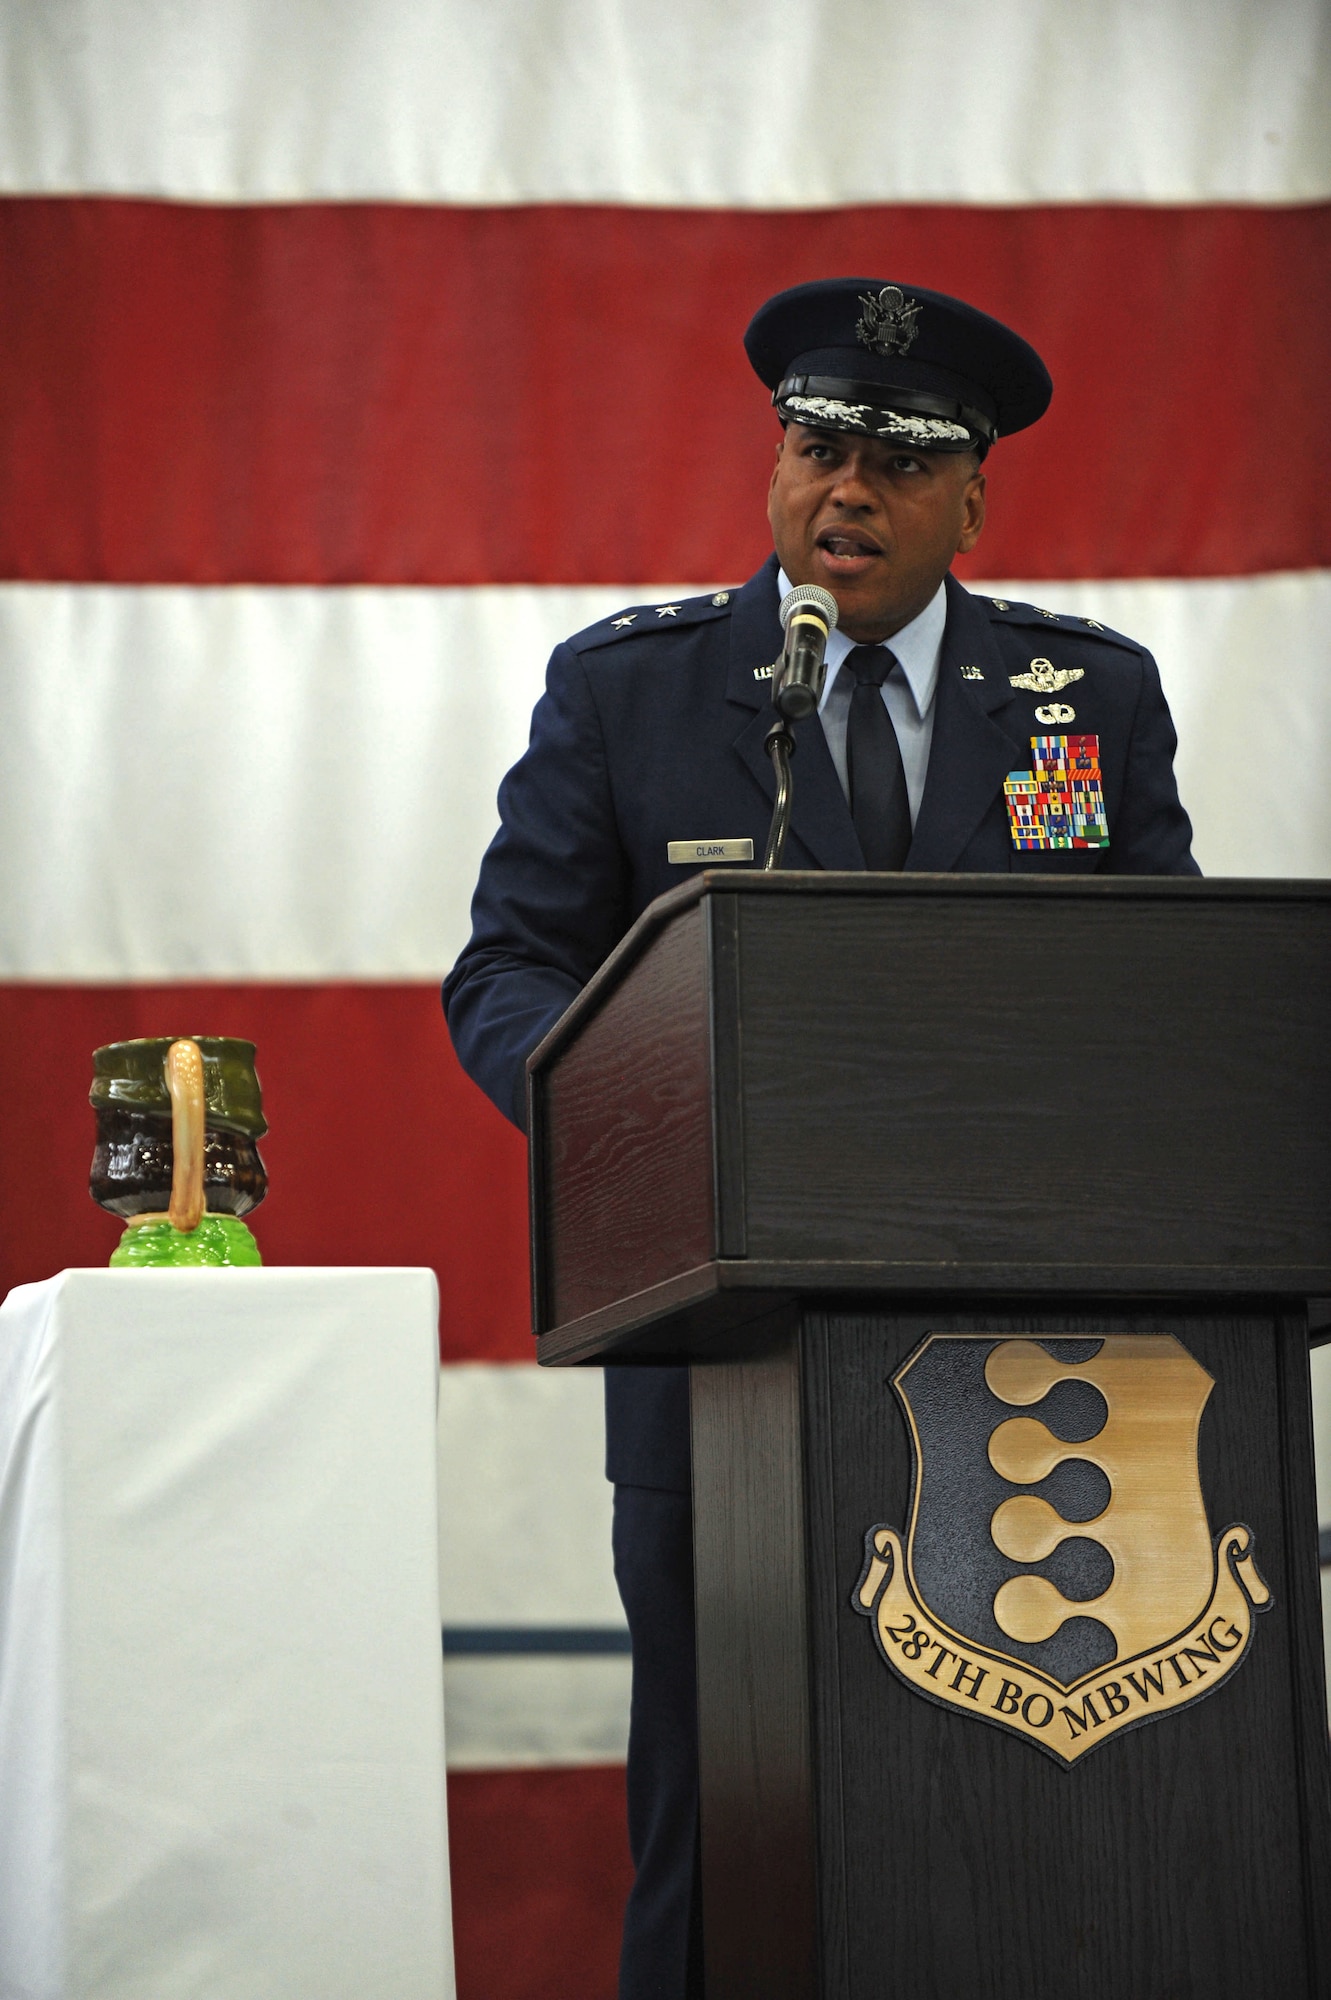 Maj. Gen. Richard Clark, Eighth Air Force commander, stands next to the 28th Bomb Wing Toby jug as he addresses Ellsworth Airmen during the B-1 realignment ceremony at Ellsworth Air Force Base, S.D., Sept. 28, 2015. At the conclusion of the event, the jug was turned to face the crowd, symbolizing Ellsworth’s acceptance of the mission to be ready to deliver combat airpower anywhere in the world, any time. (U.S. Air Force photo by Airman Sadie Colbert/Released)